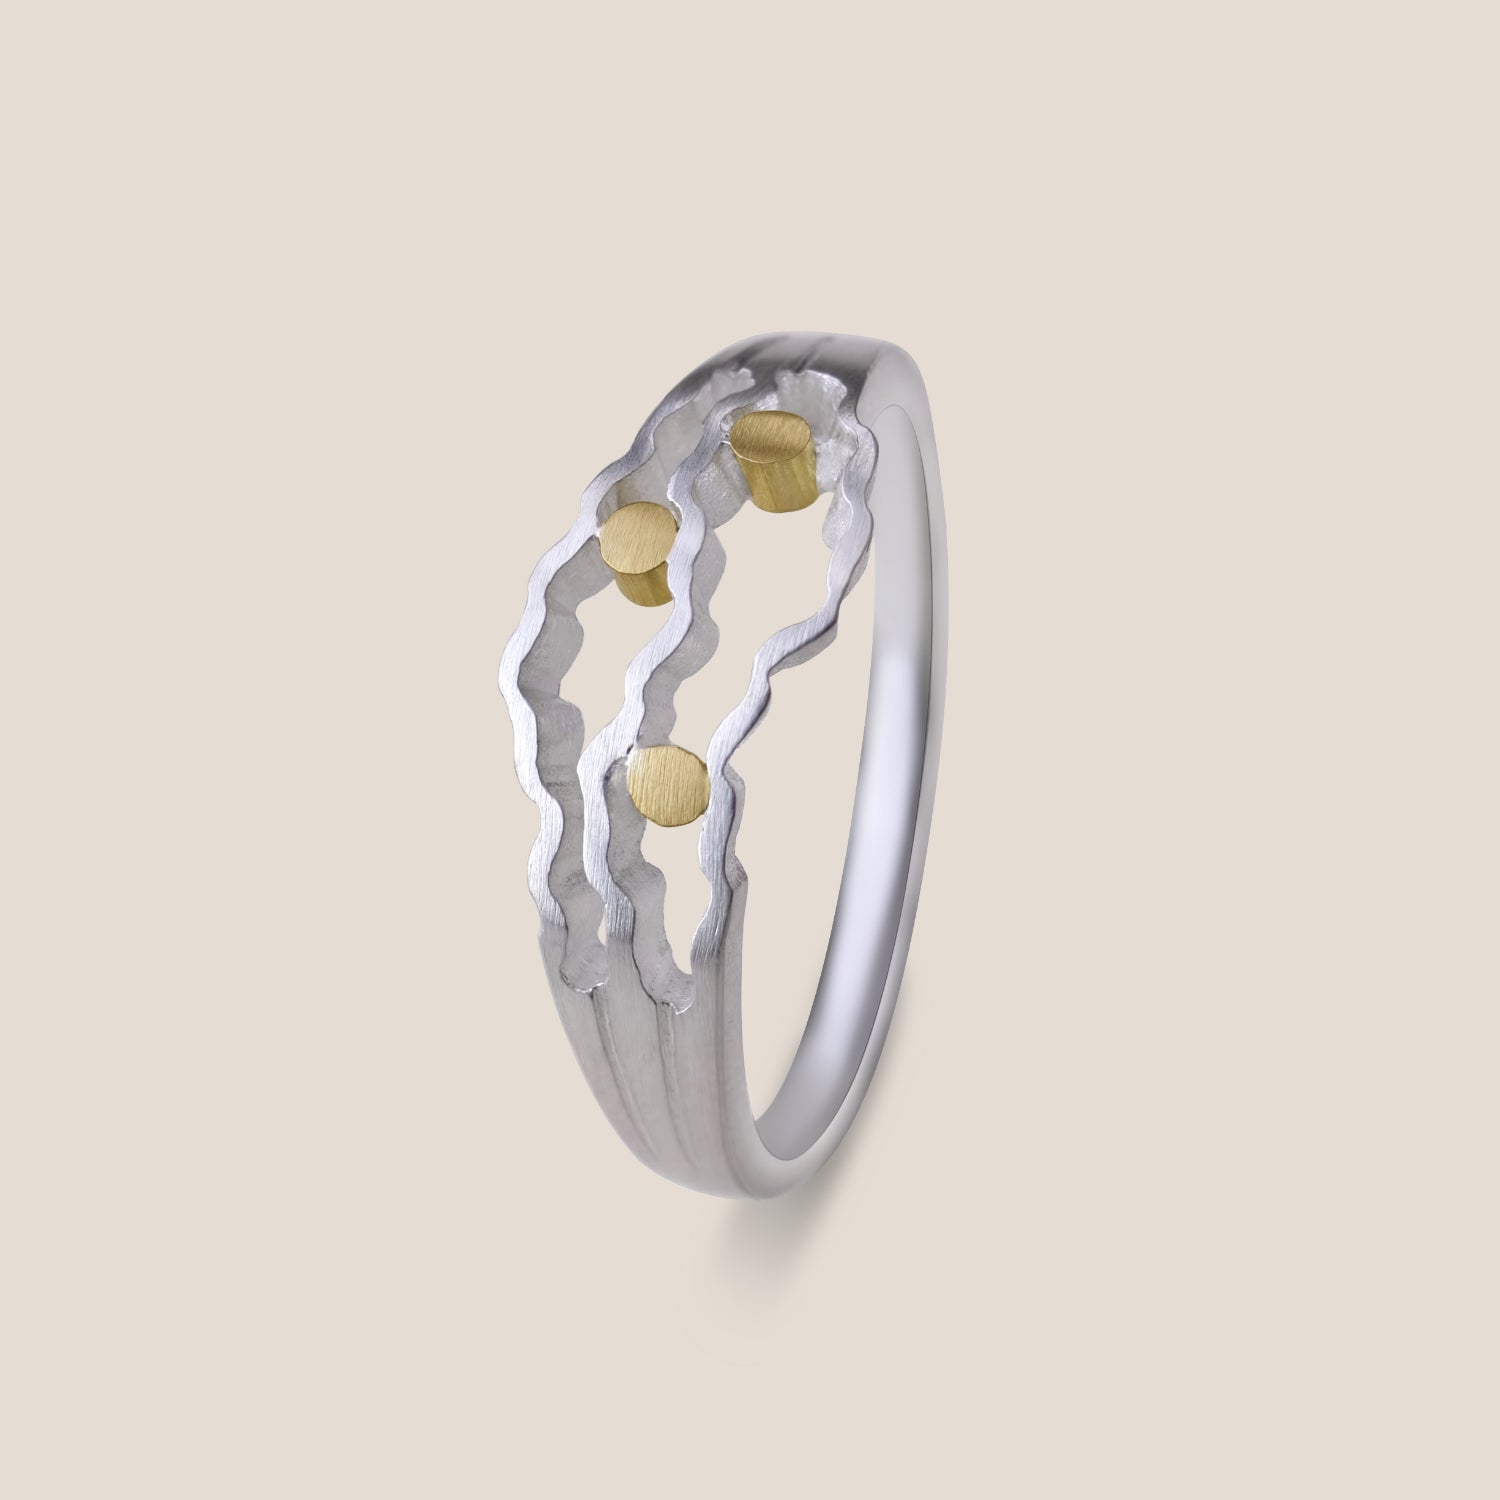 NEW - Strata Ring - Silver and Gold